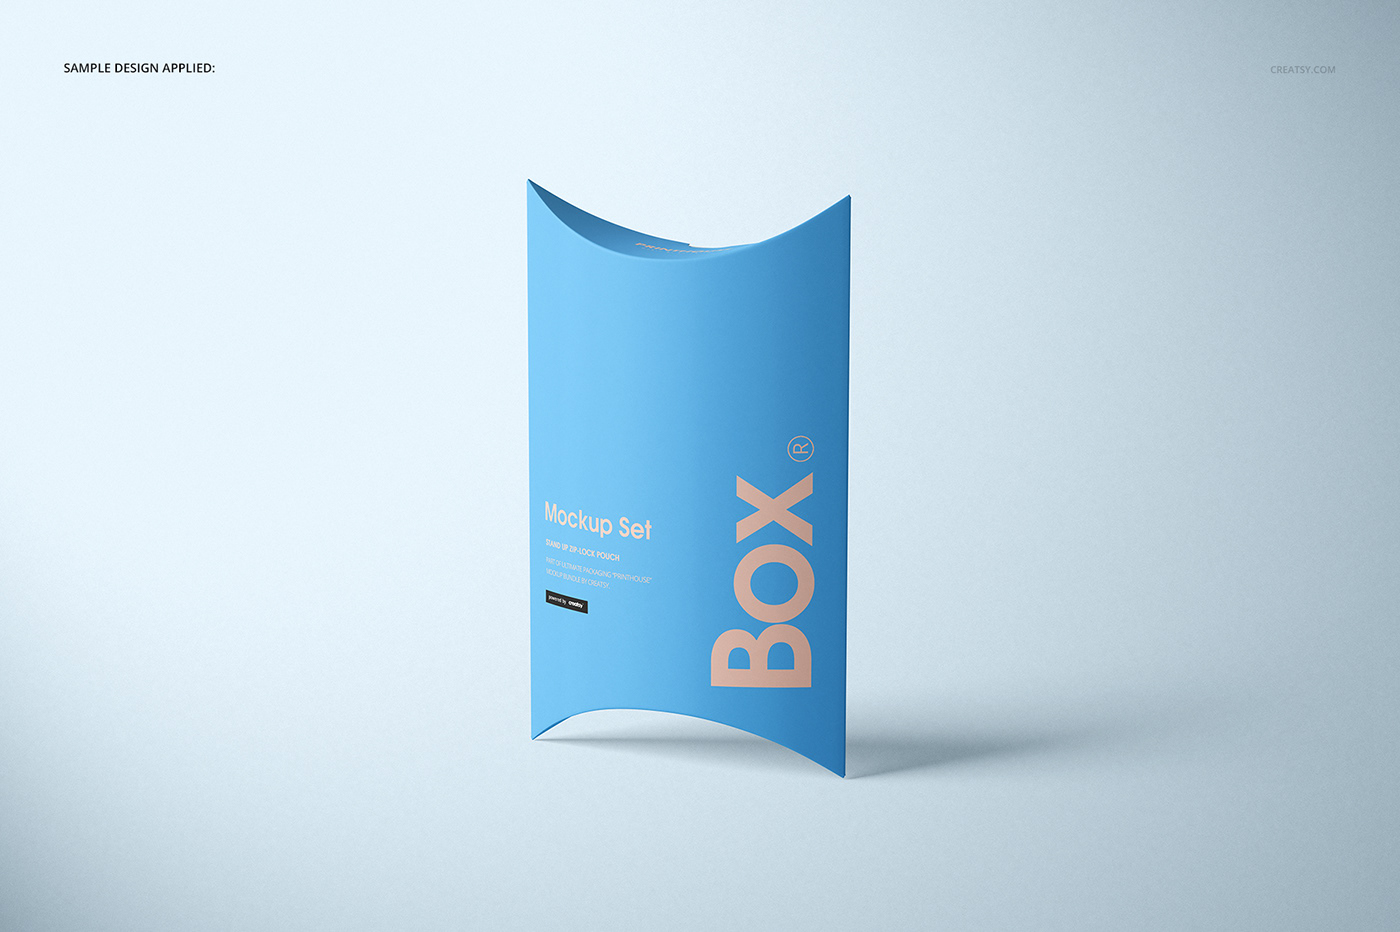 mock-up Mockup mockups template pillow boxes gift box Packaging paper